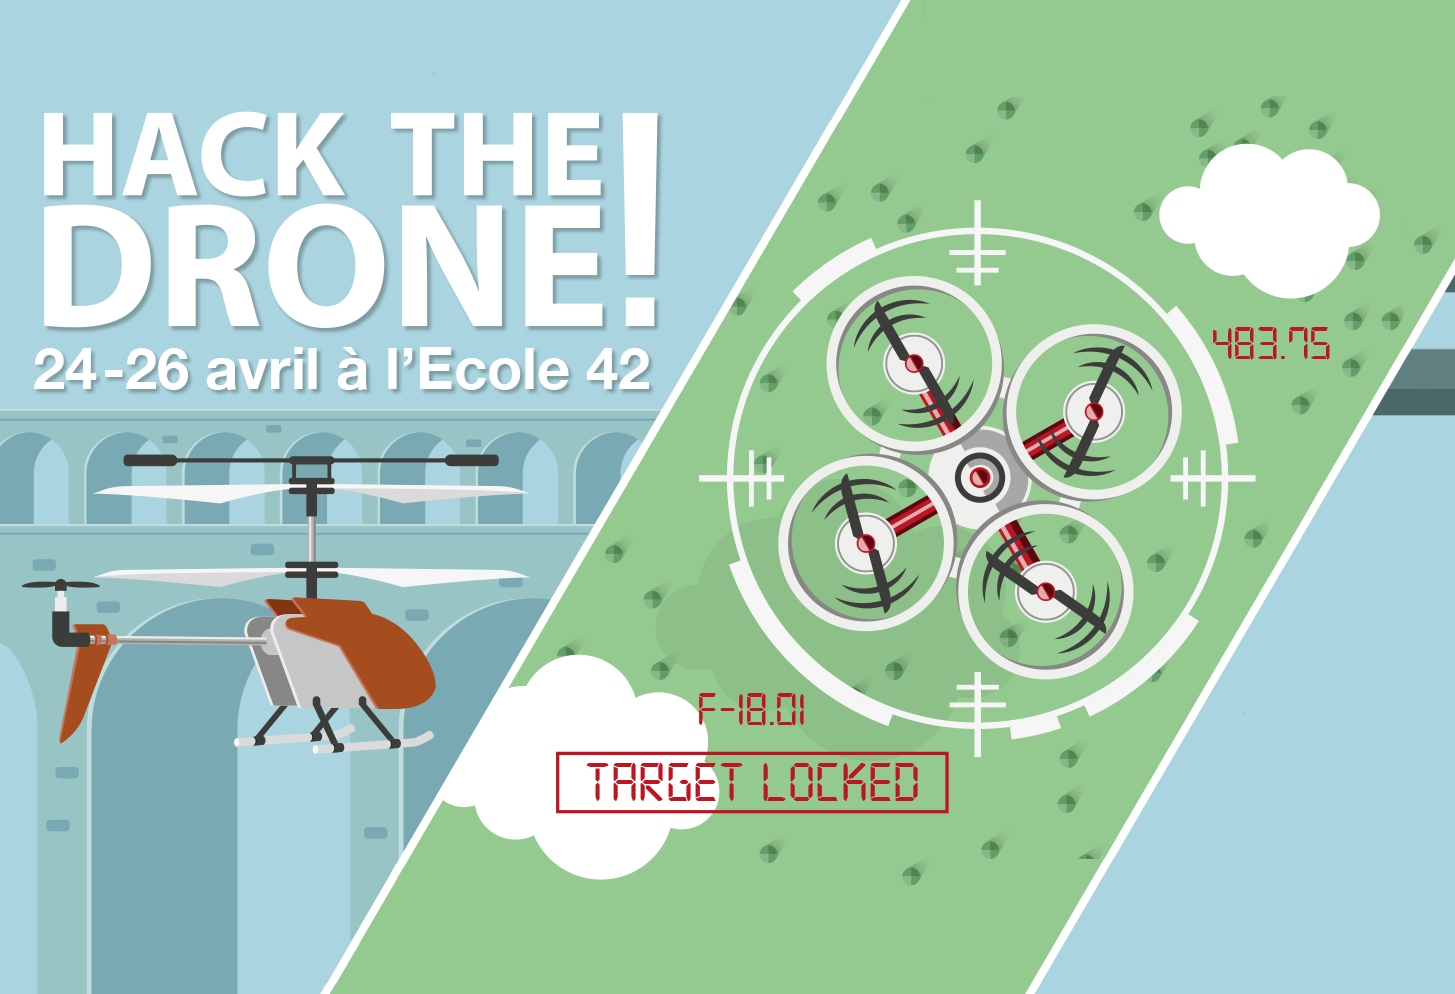 Hack The Drone!